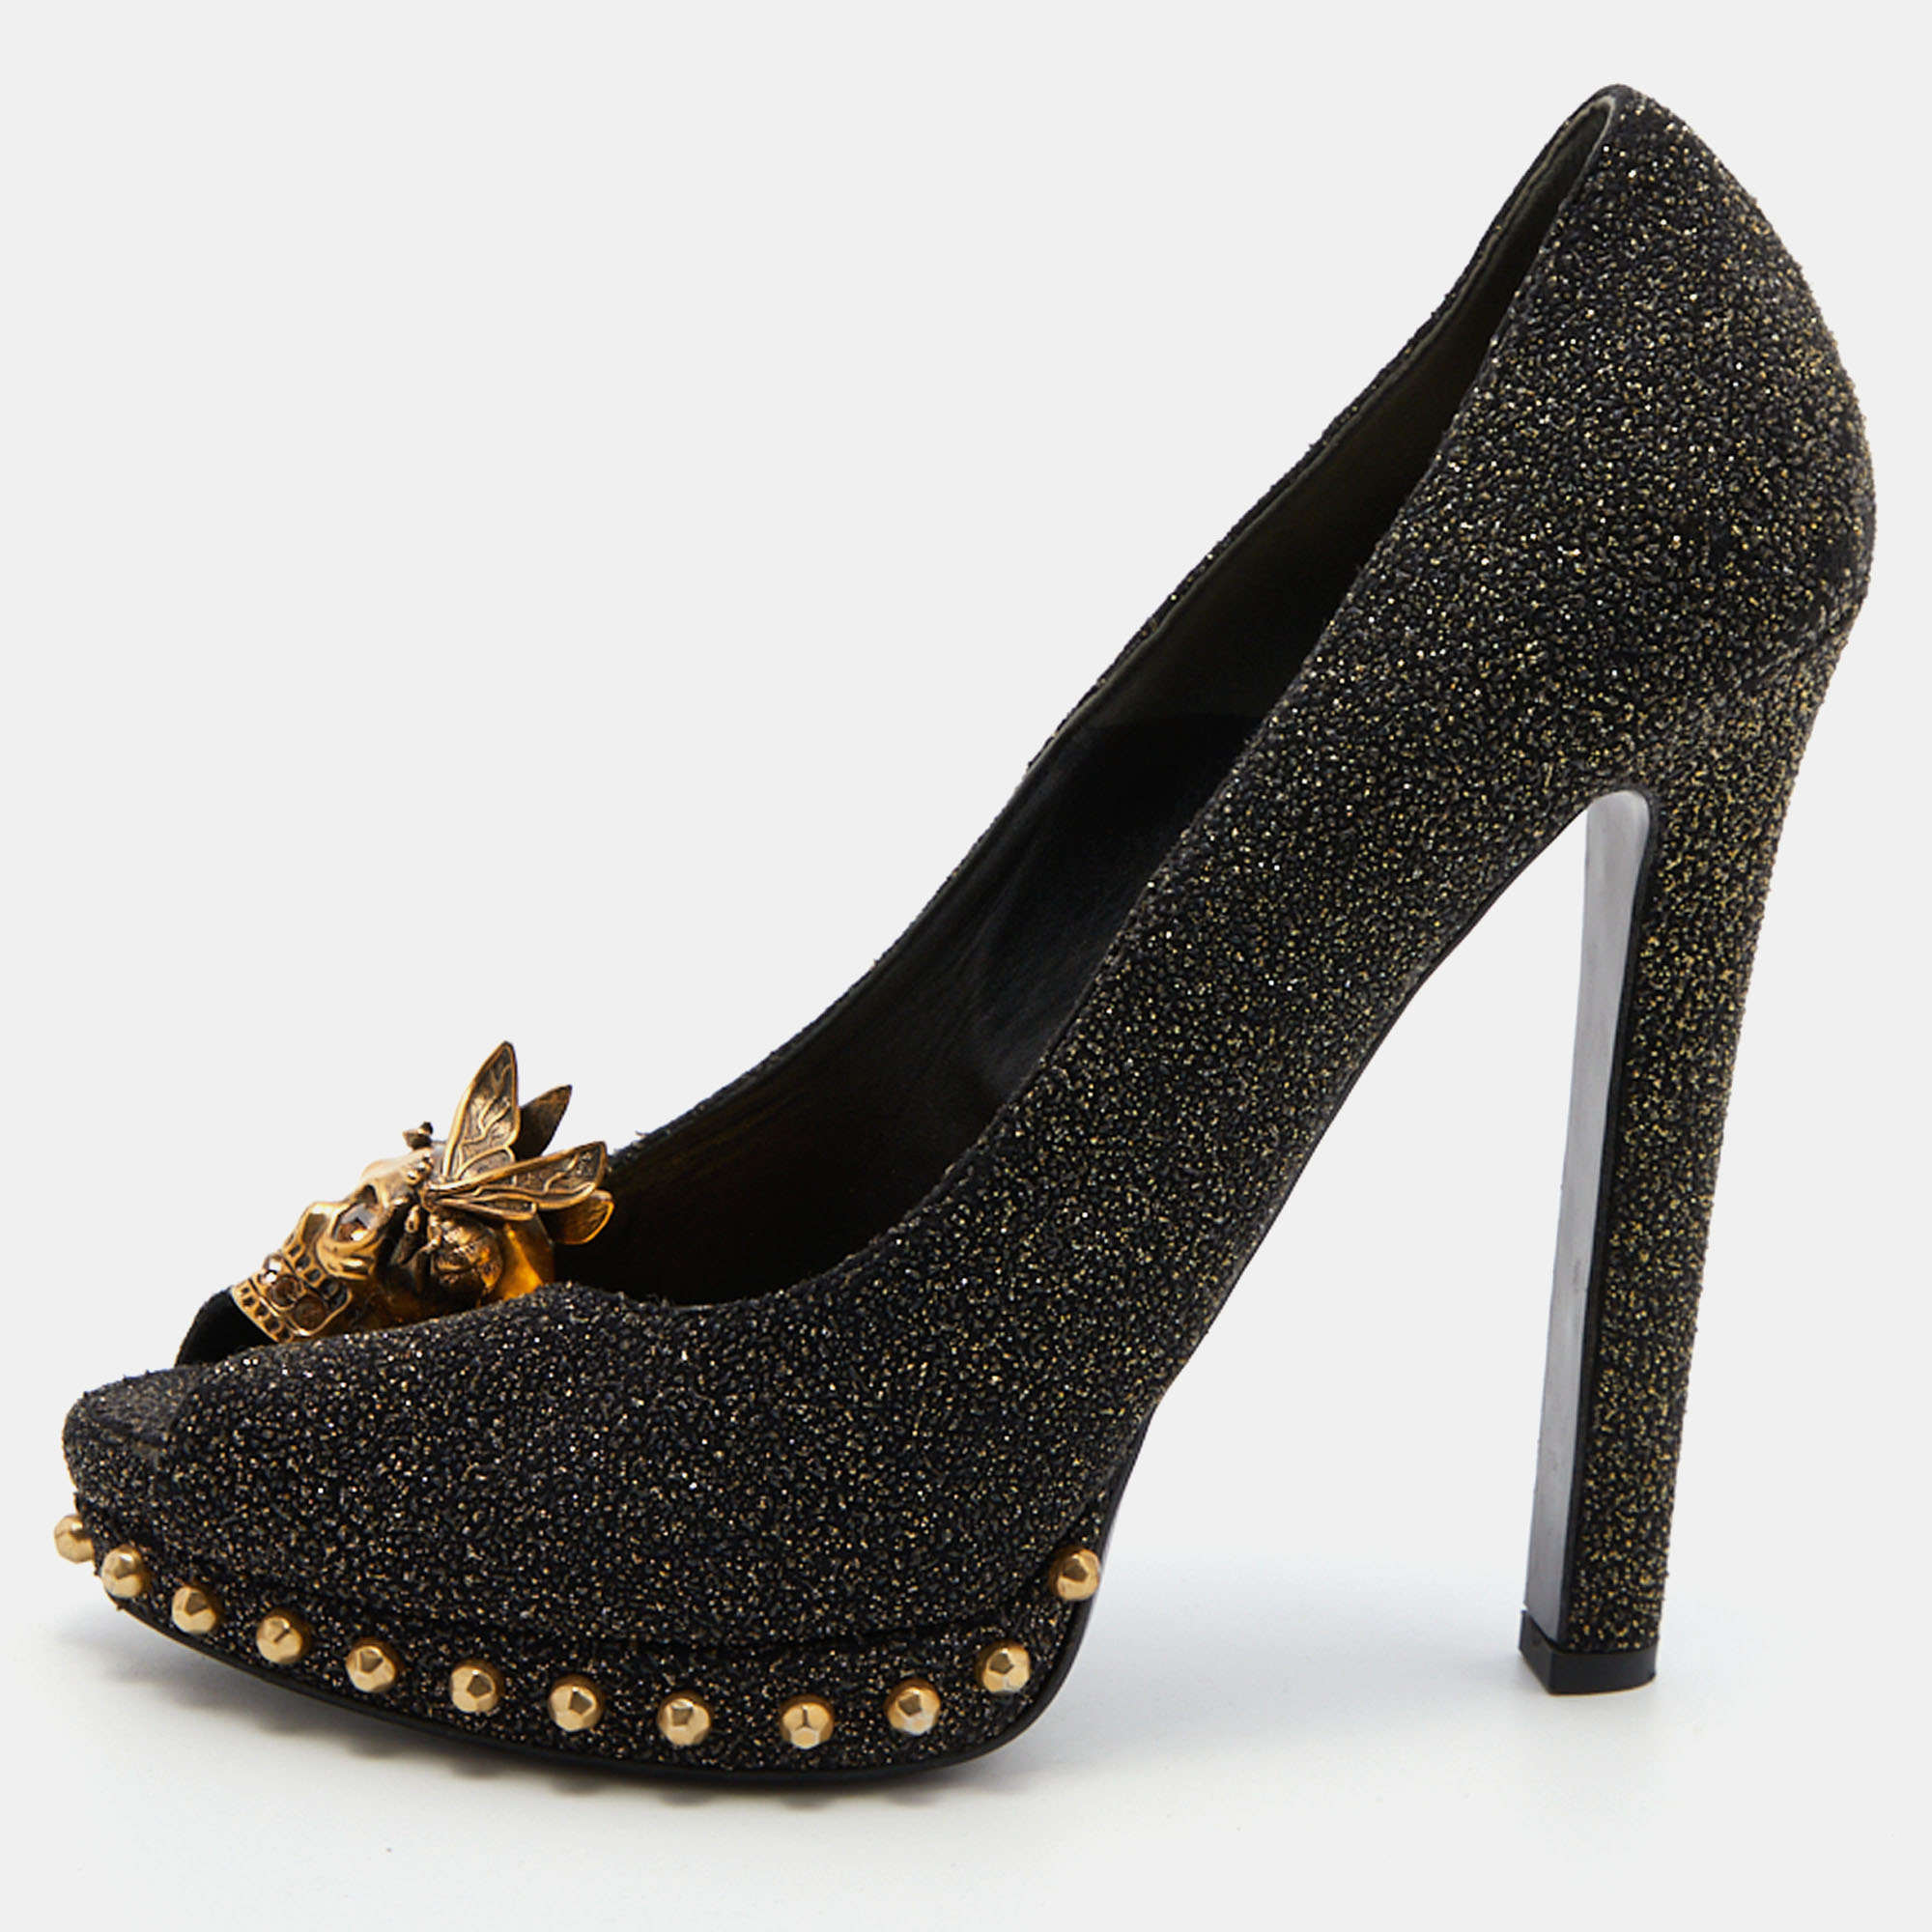 Pre-owned Alexander Mcqueen Black/gold Textured Suede Embellished Skull Peep Toe Pumps Size 39.5